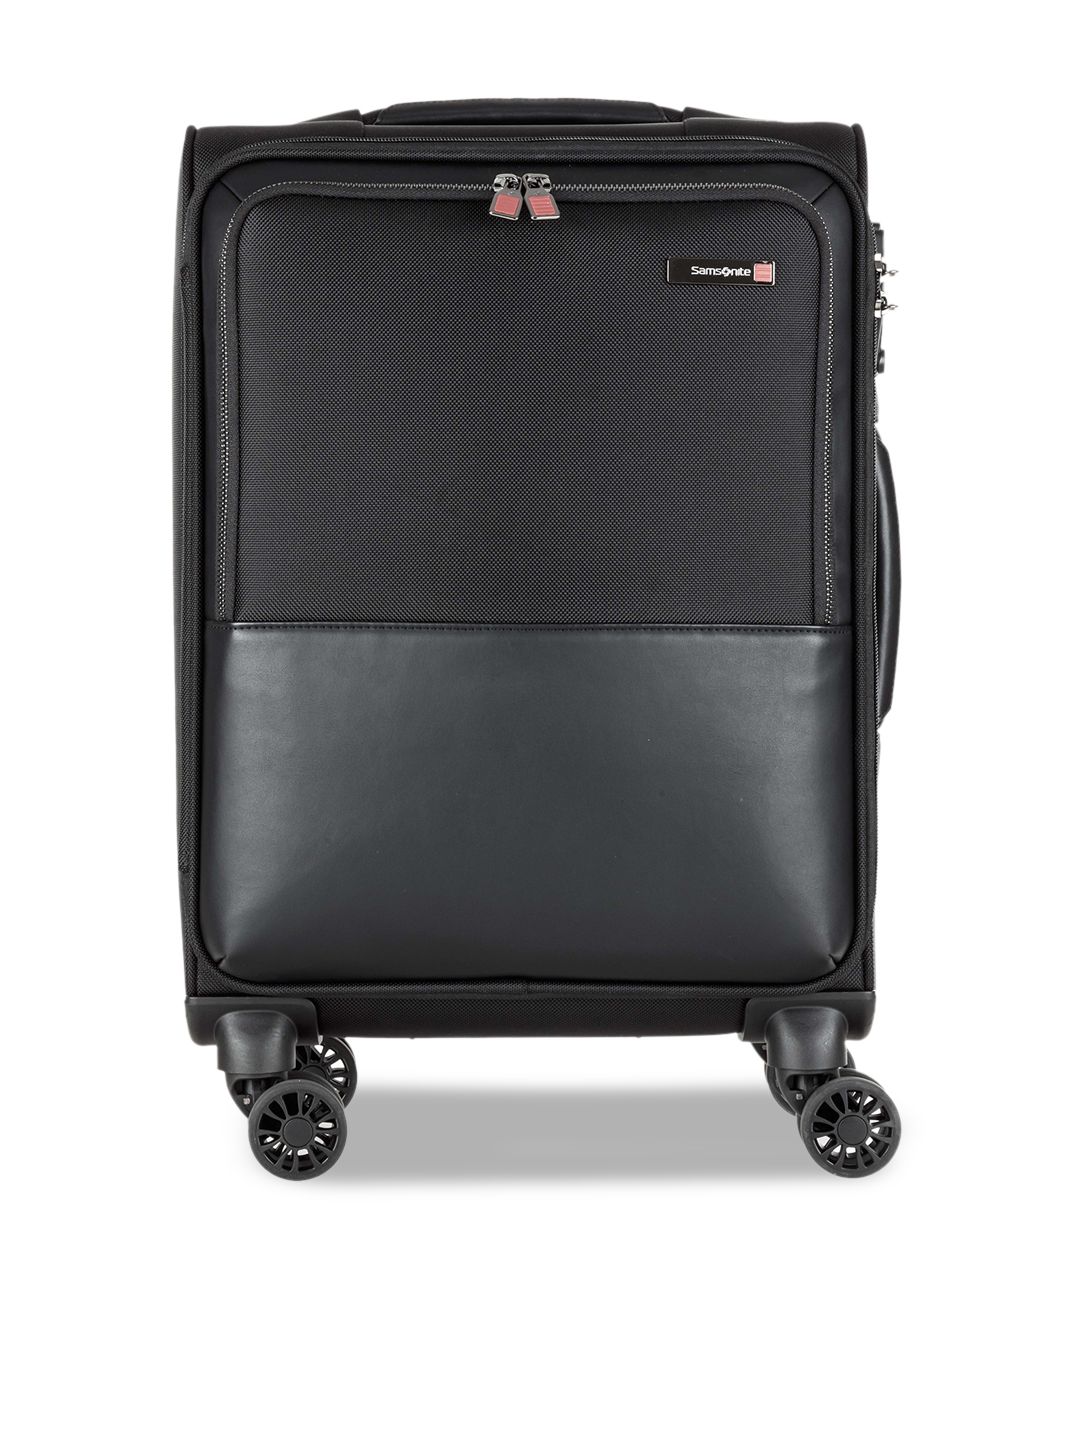 Samsonite Black Soft Sided Cabin Trolley Suitcase Price in India